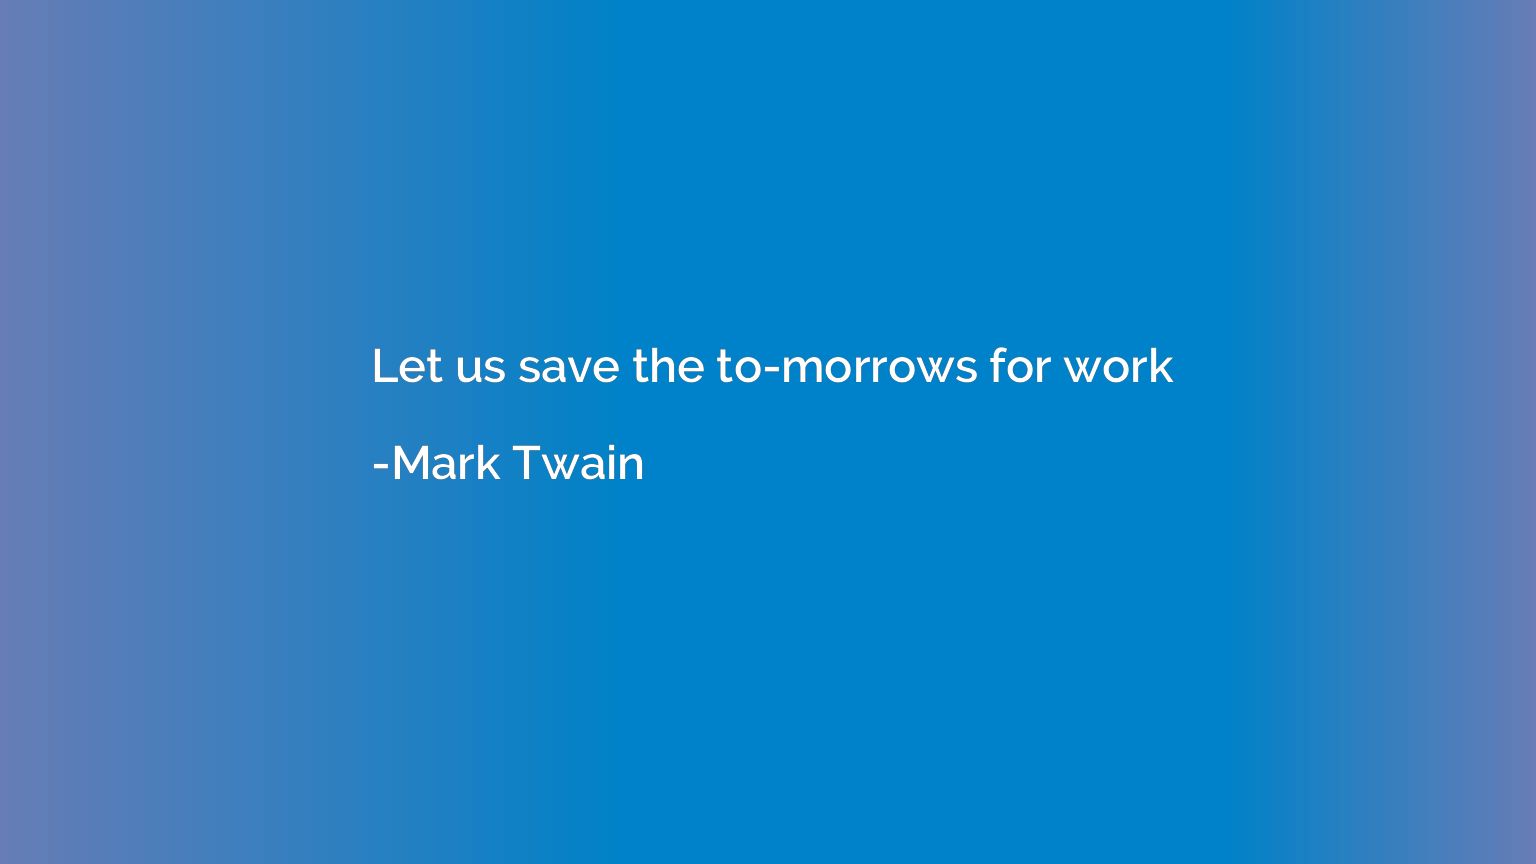 Let us save the to-morrows for work